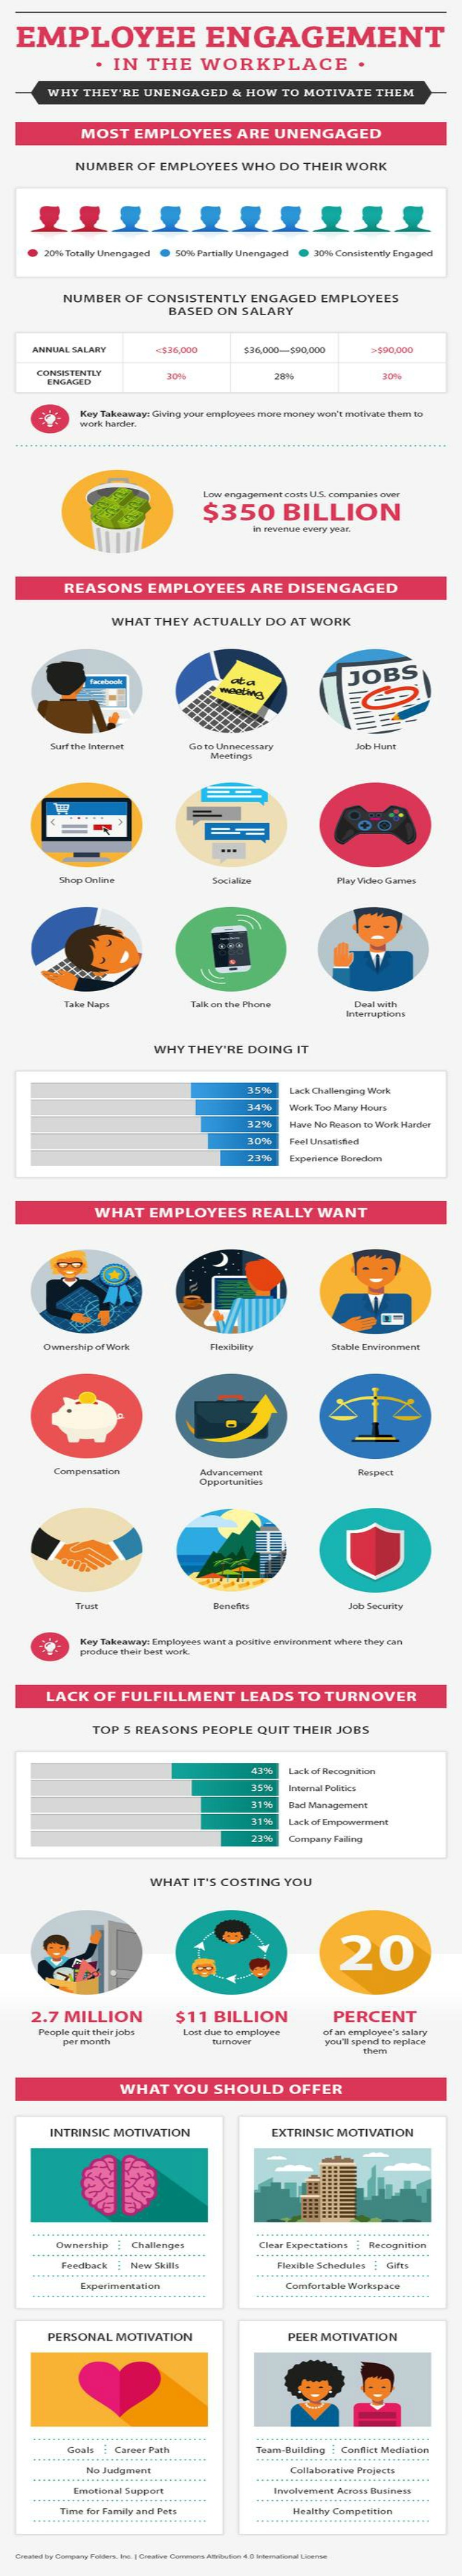 [Employee engagement infographic cr]